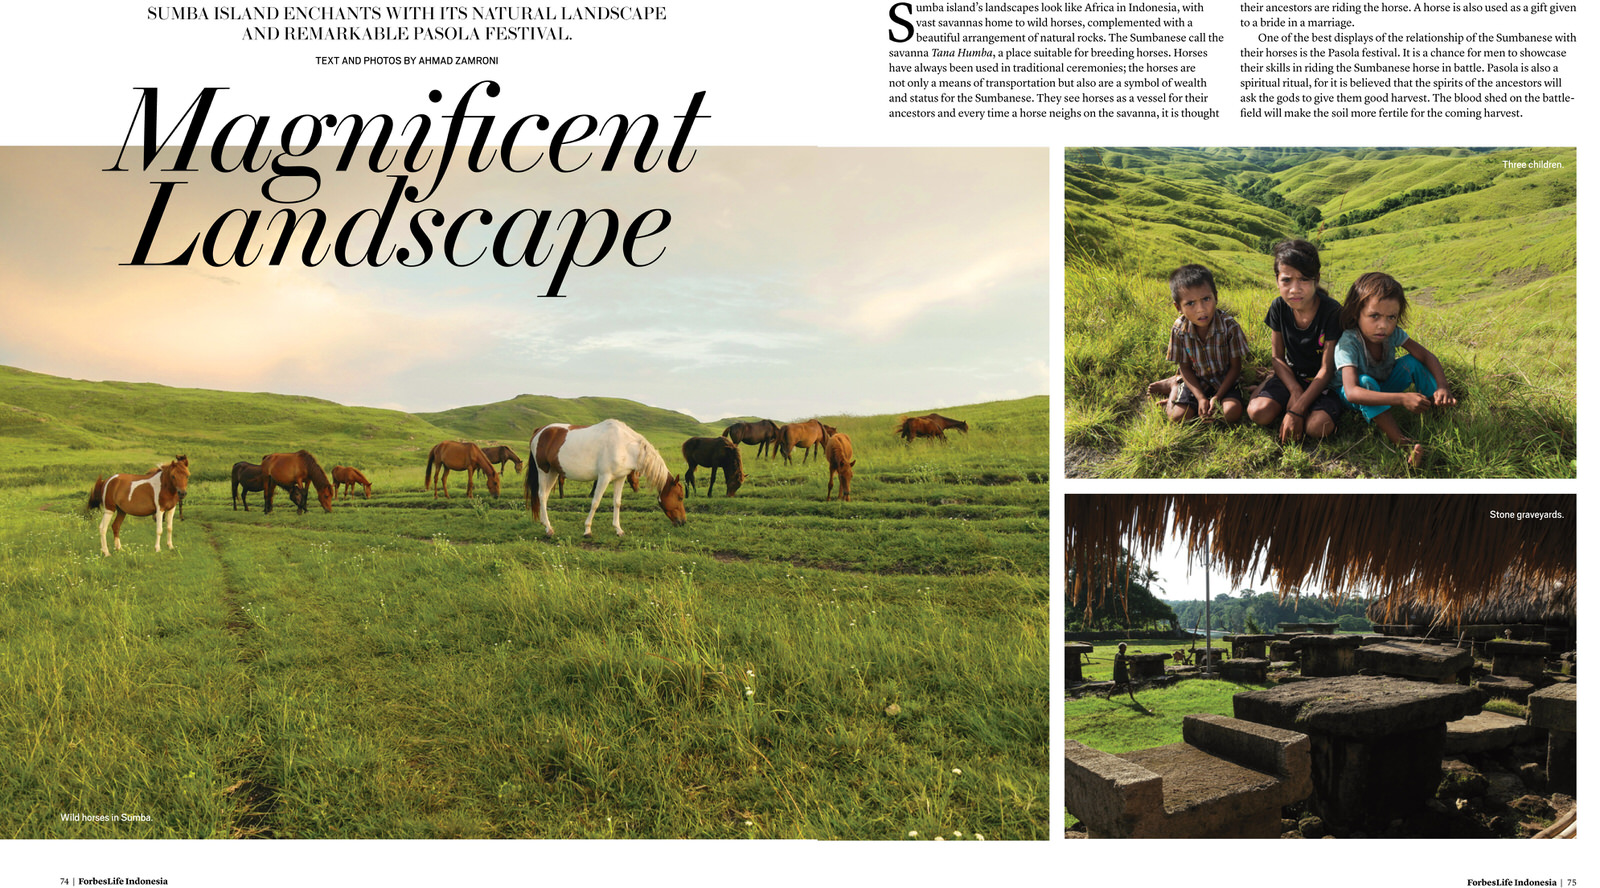 Magnificent Landscape of Sumba. ForbesLife Indonesia Jul-Sep 2015